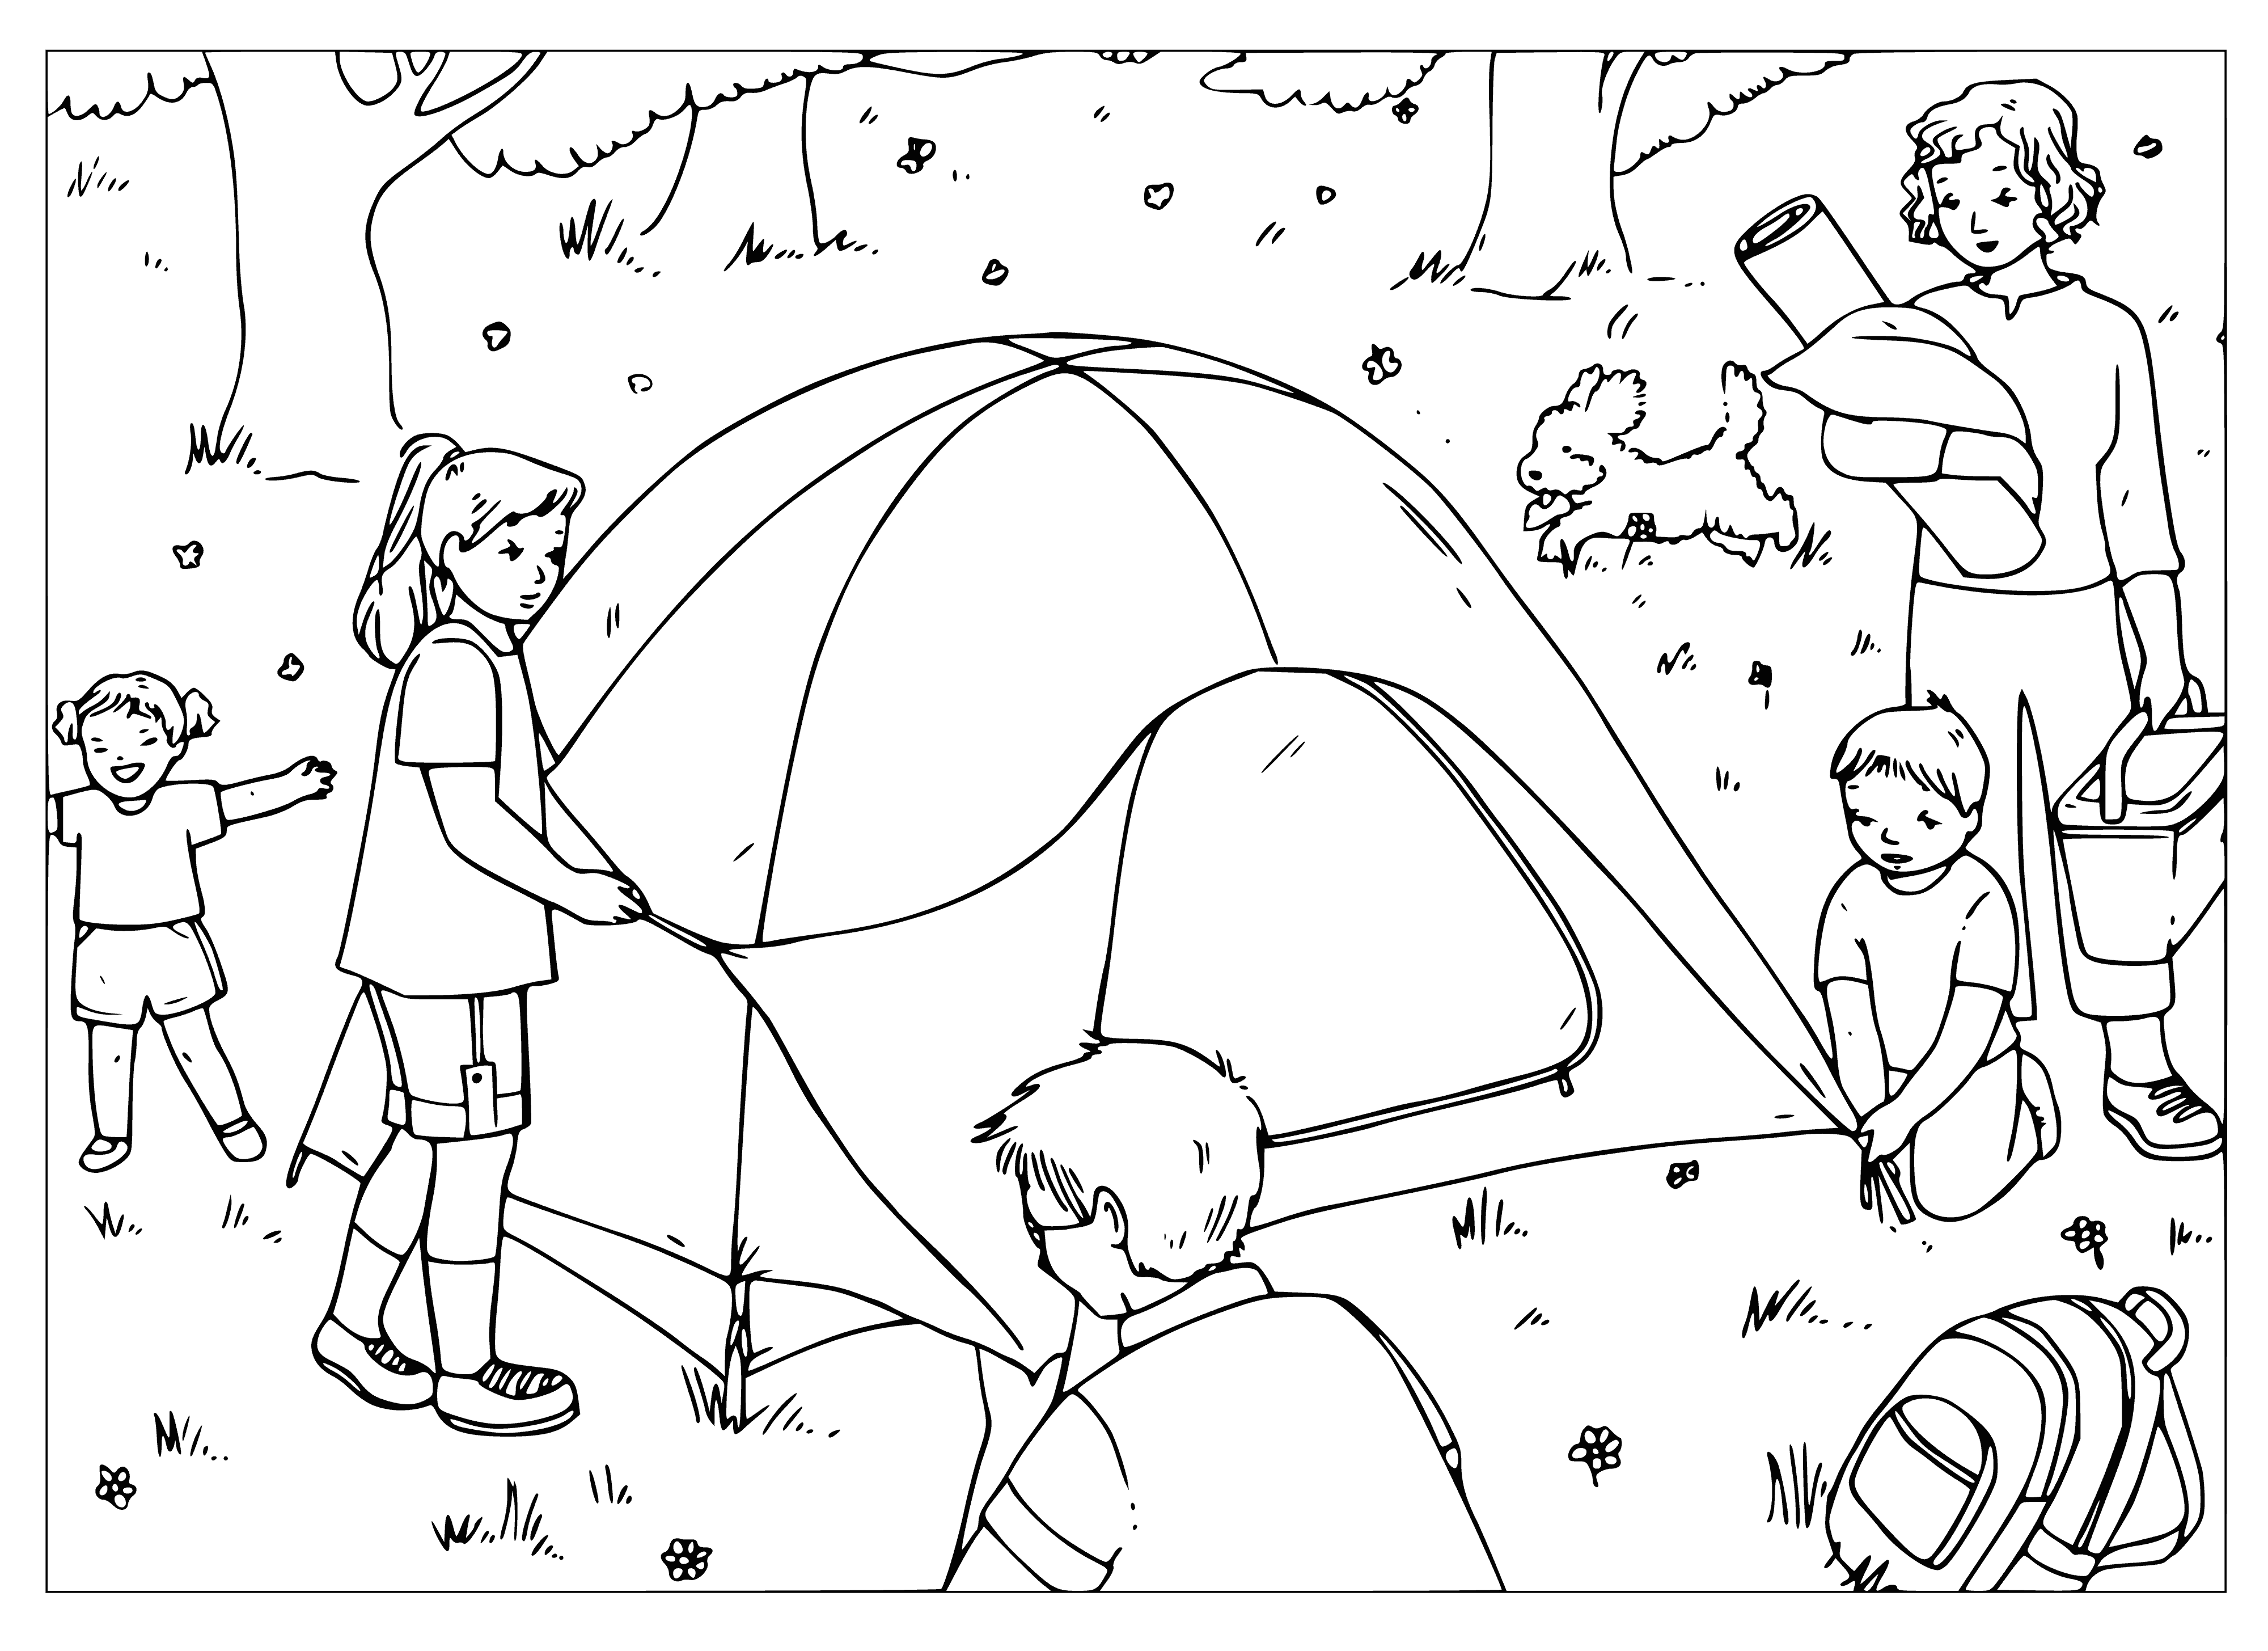 coloring page: A hike through a forest filled with leaves, trees, and a river with a bridge. Sun shining, blue sky. Perfect outdoor retreat!